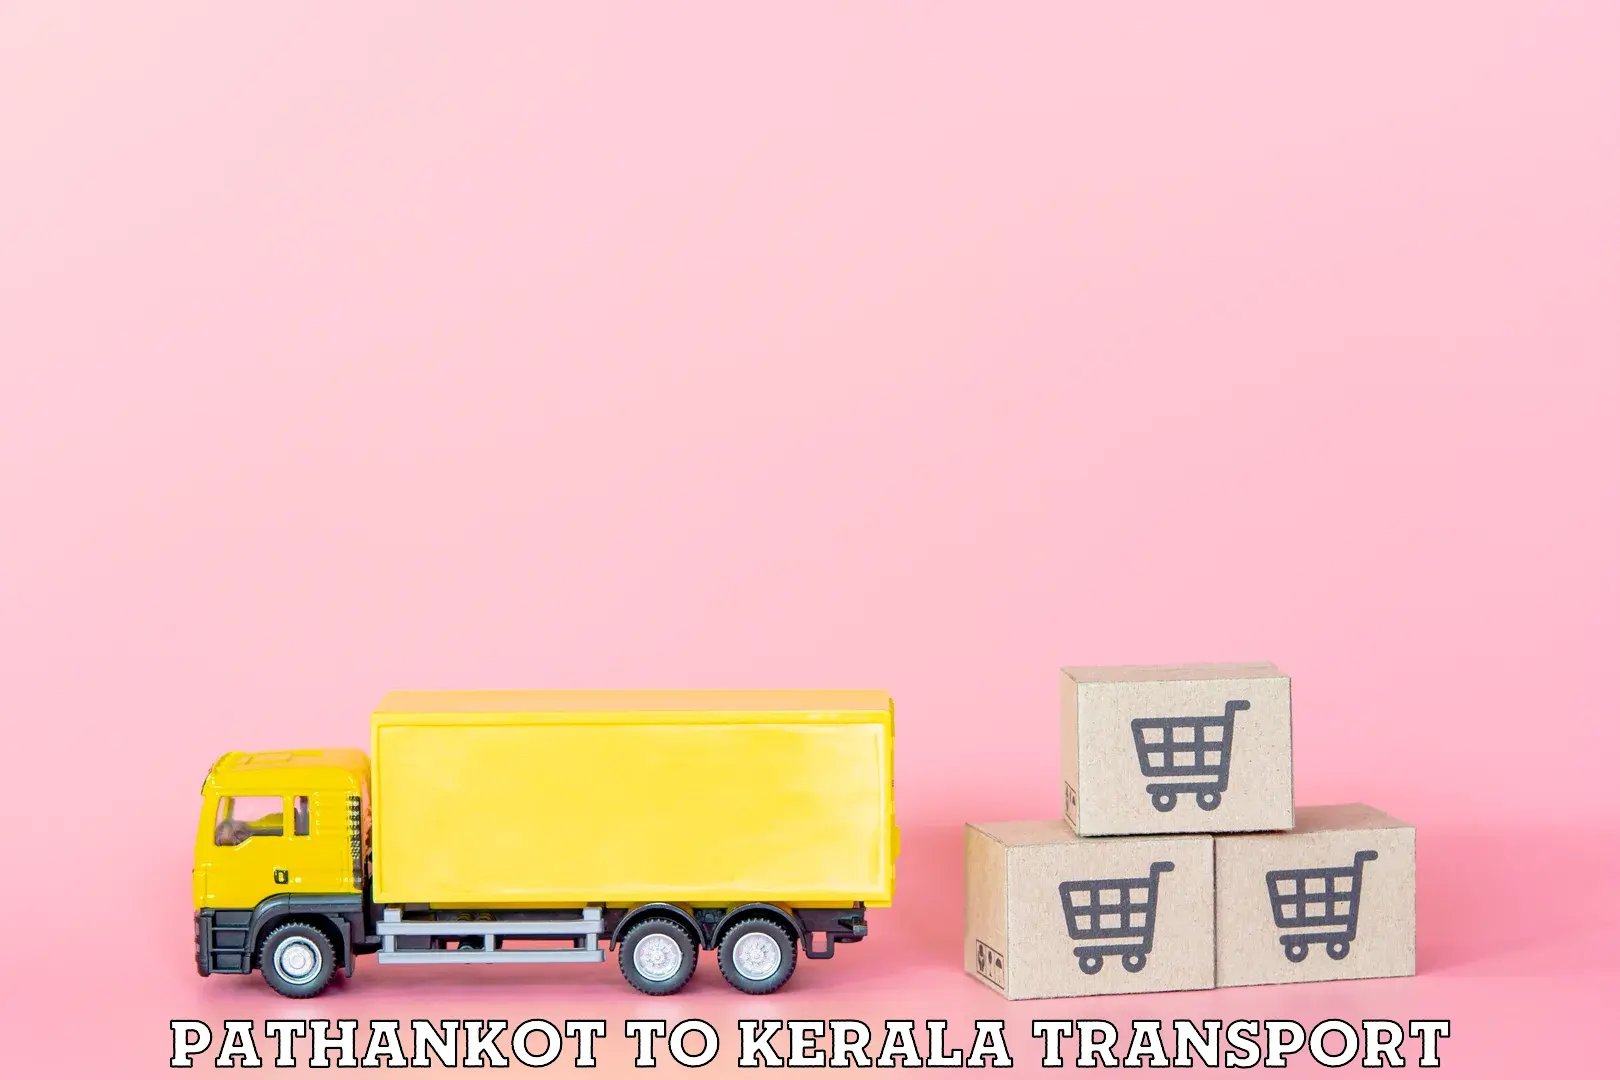 Air freight transport services Pathankot to Trivandrum